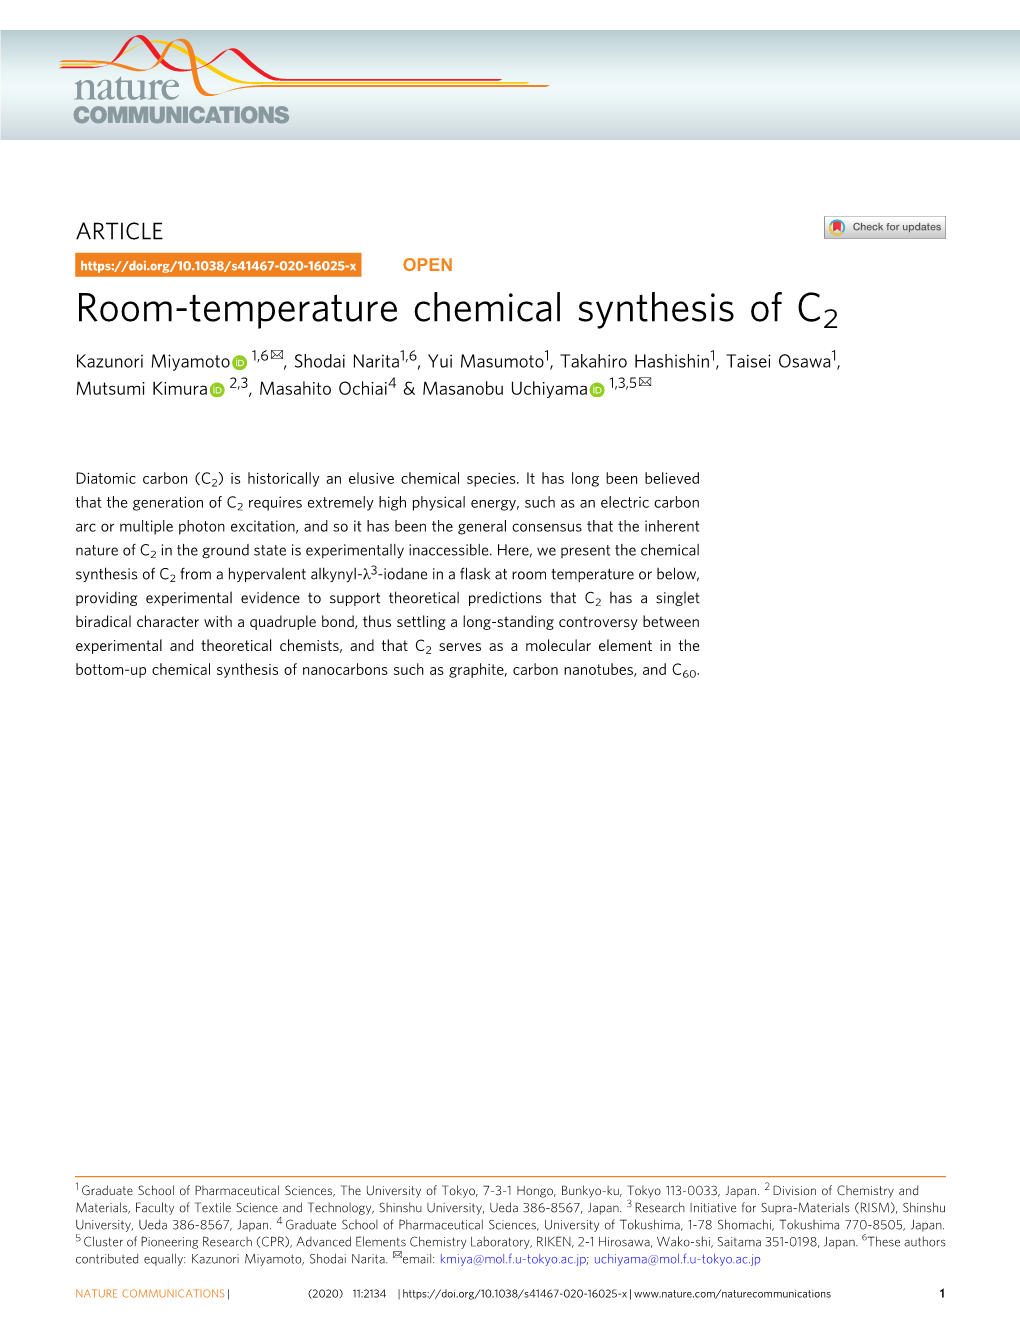 Room-Temperature Chemical Synthesis of C2